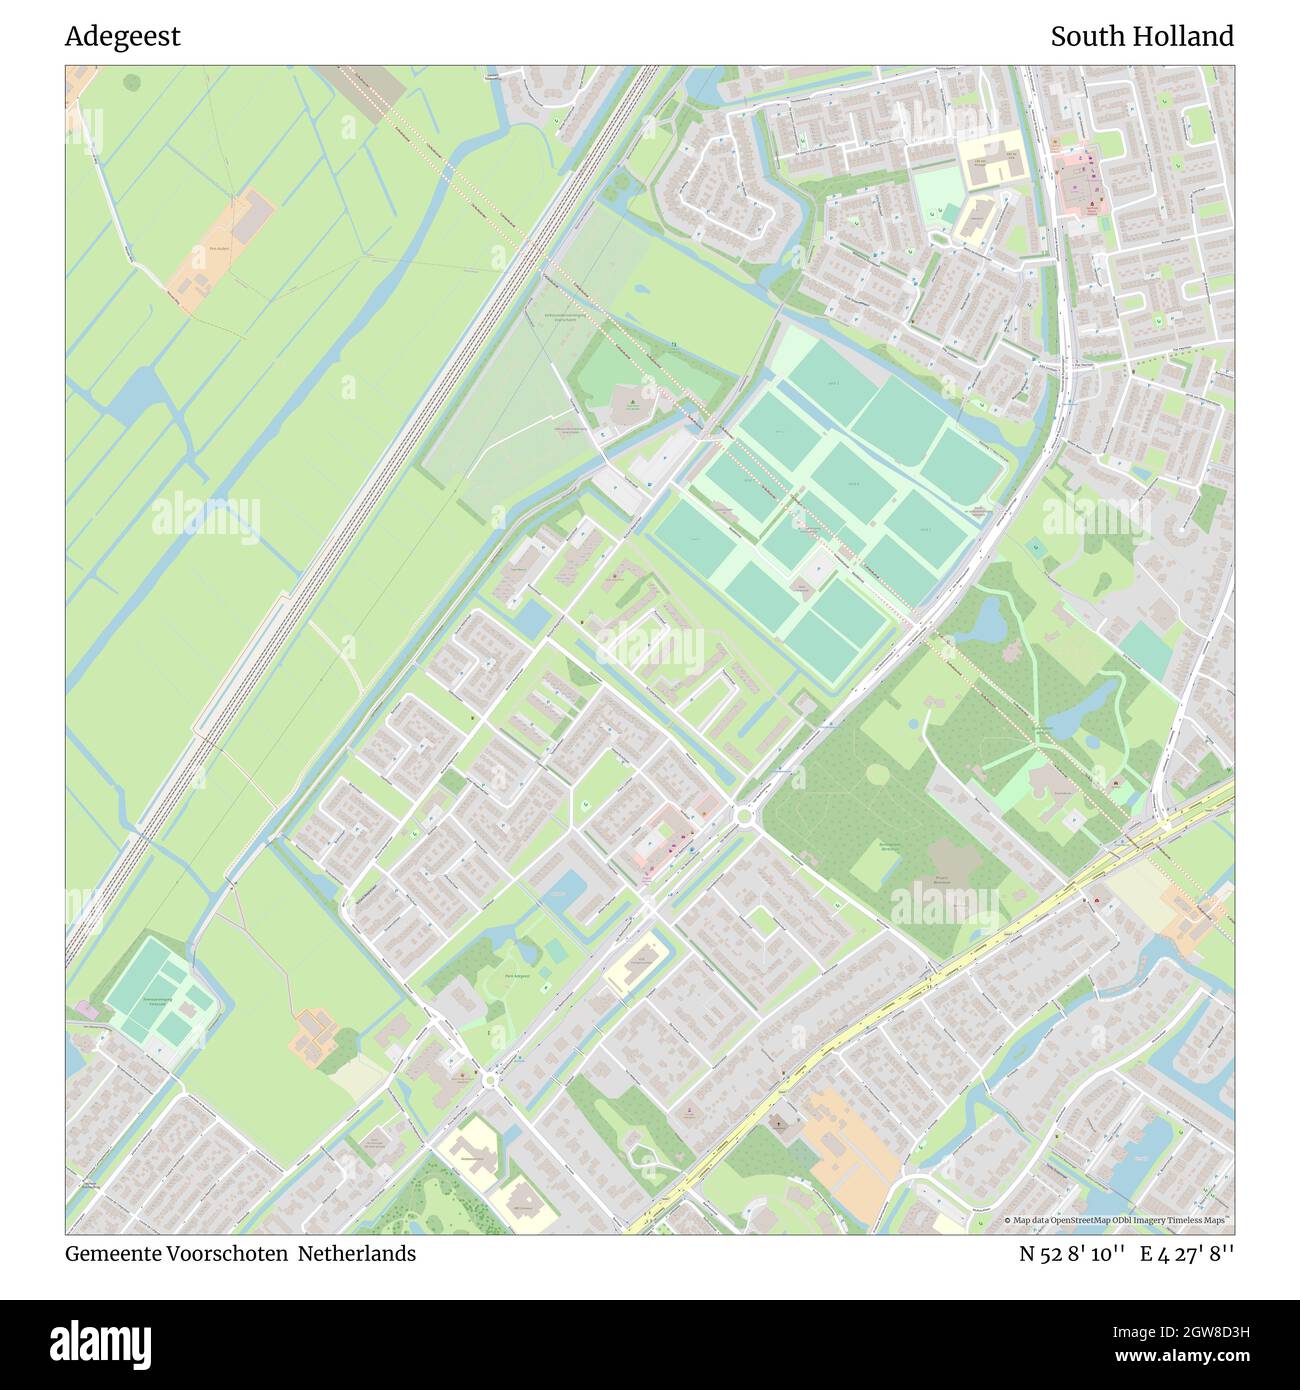 Adegeest, Gemeente Voorschoten, Netherlands, South Holland, N 52 8' 10'', E 4 27' 8'', map, Timeless Map published in 2021. Travelers, explorers and adventurers like Florence Nightingale, David Livingstone, Ernest Shackleton, Lewis and Clark and Sherlock Holmes relied on maps to plan travels to the world's most remote corners, Timeless Maps is mapping most locations on the globe, showing the achievement of great dreams Stock Photo